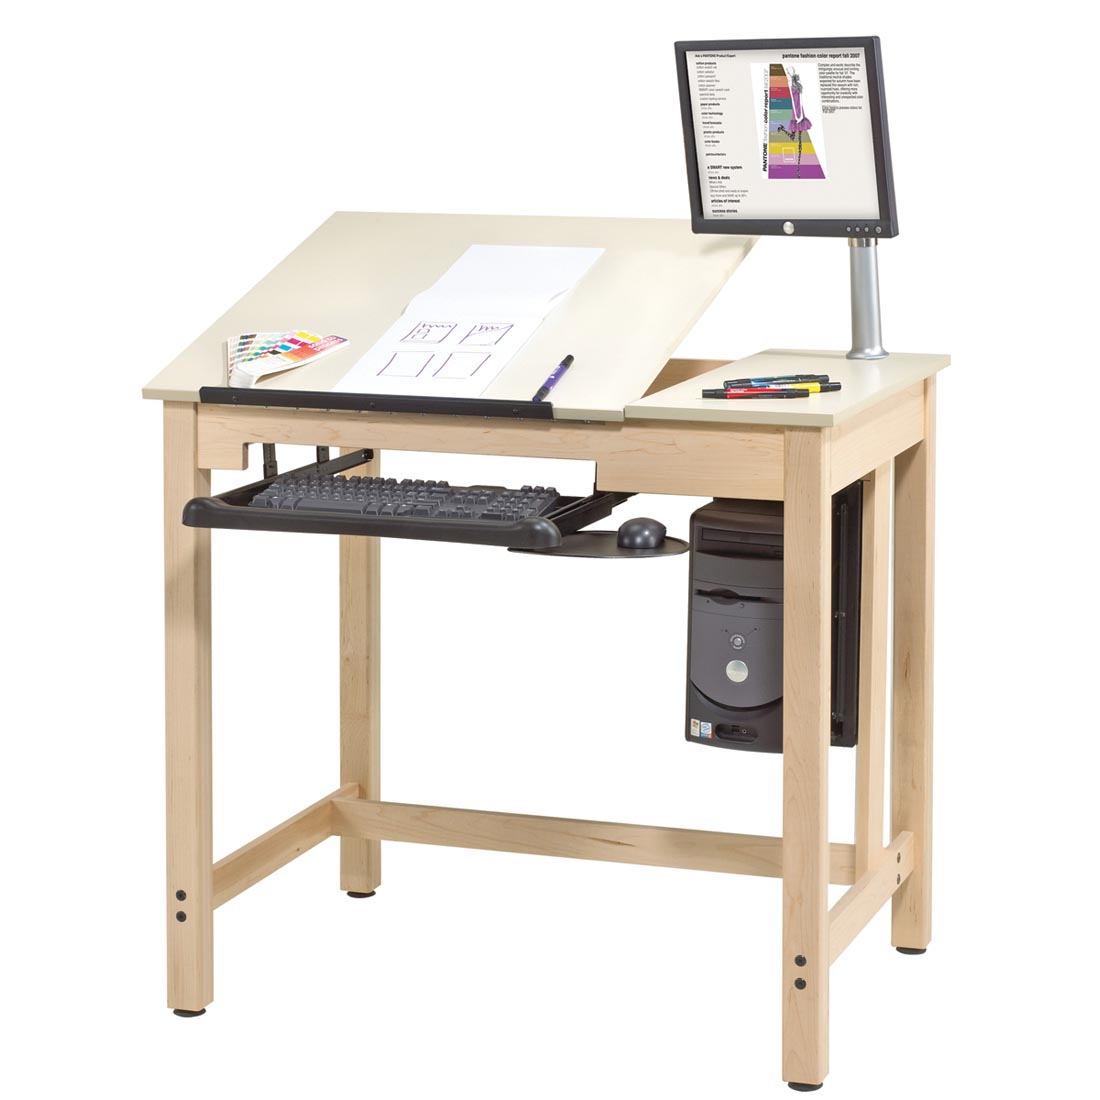 Drawing Table shown with mounted computer and drawing markers as a suggestion on how to use table